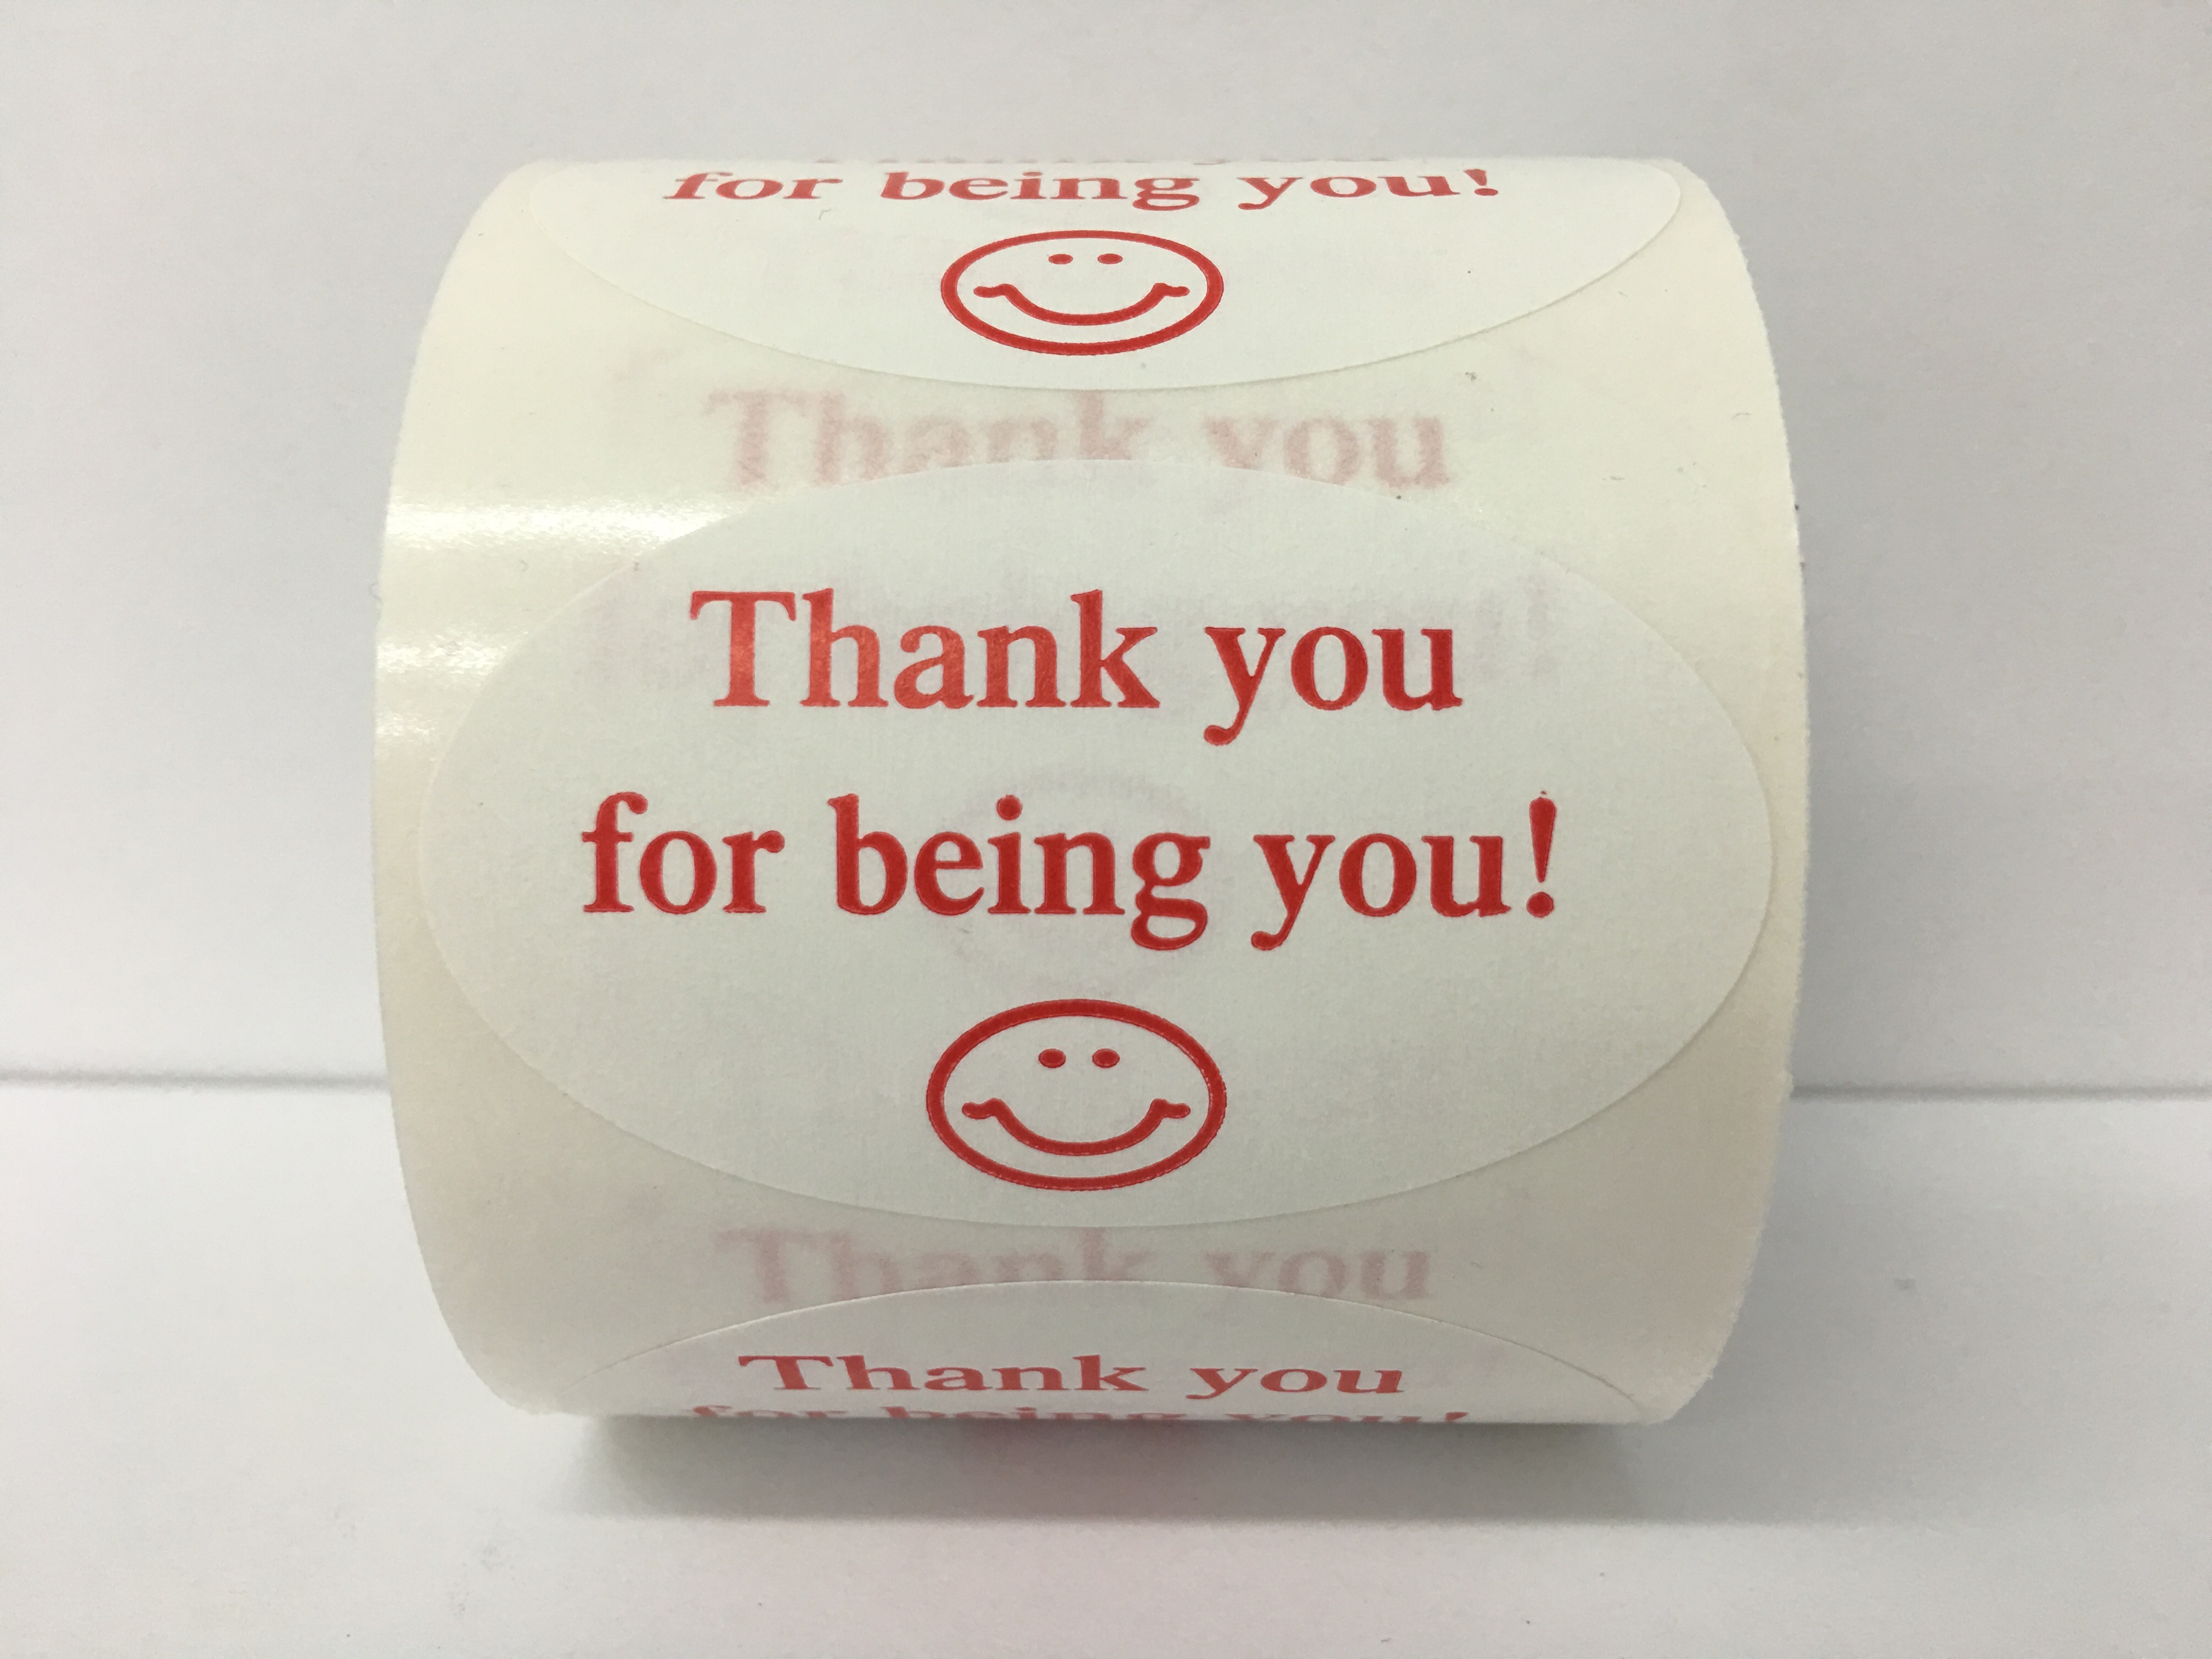 "Thank you for being you!" Stickers, Red and White Oval - 500 Labels